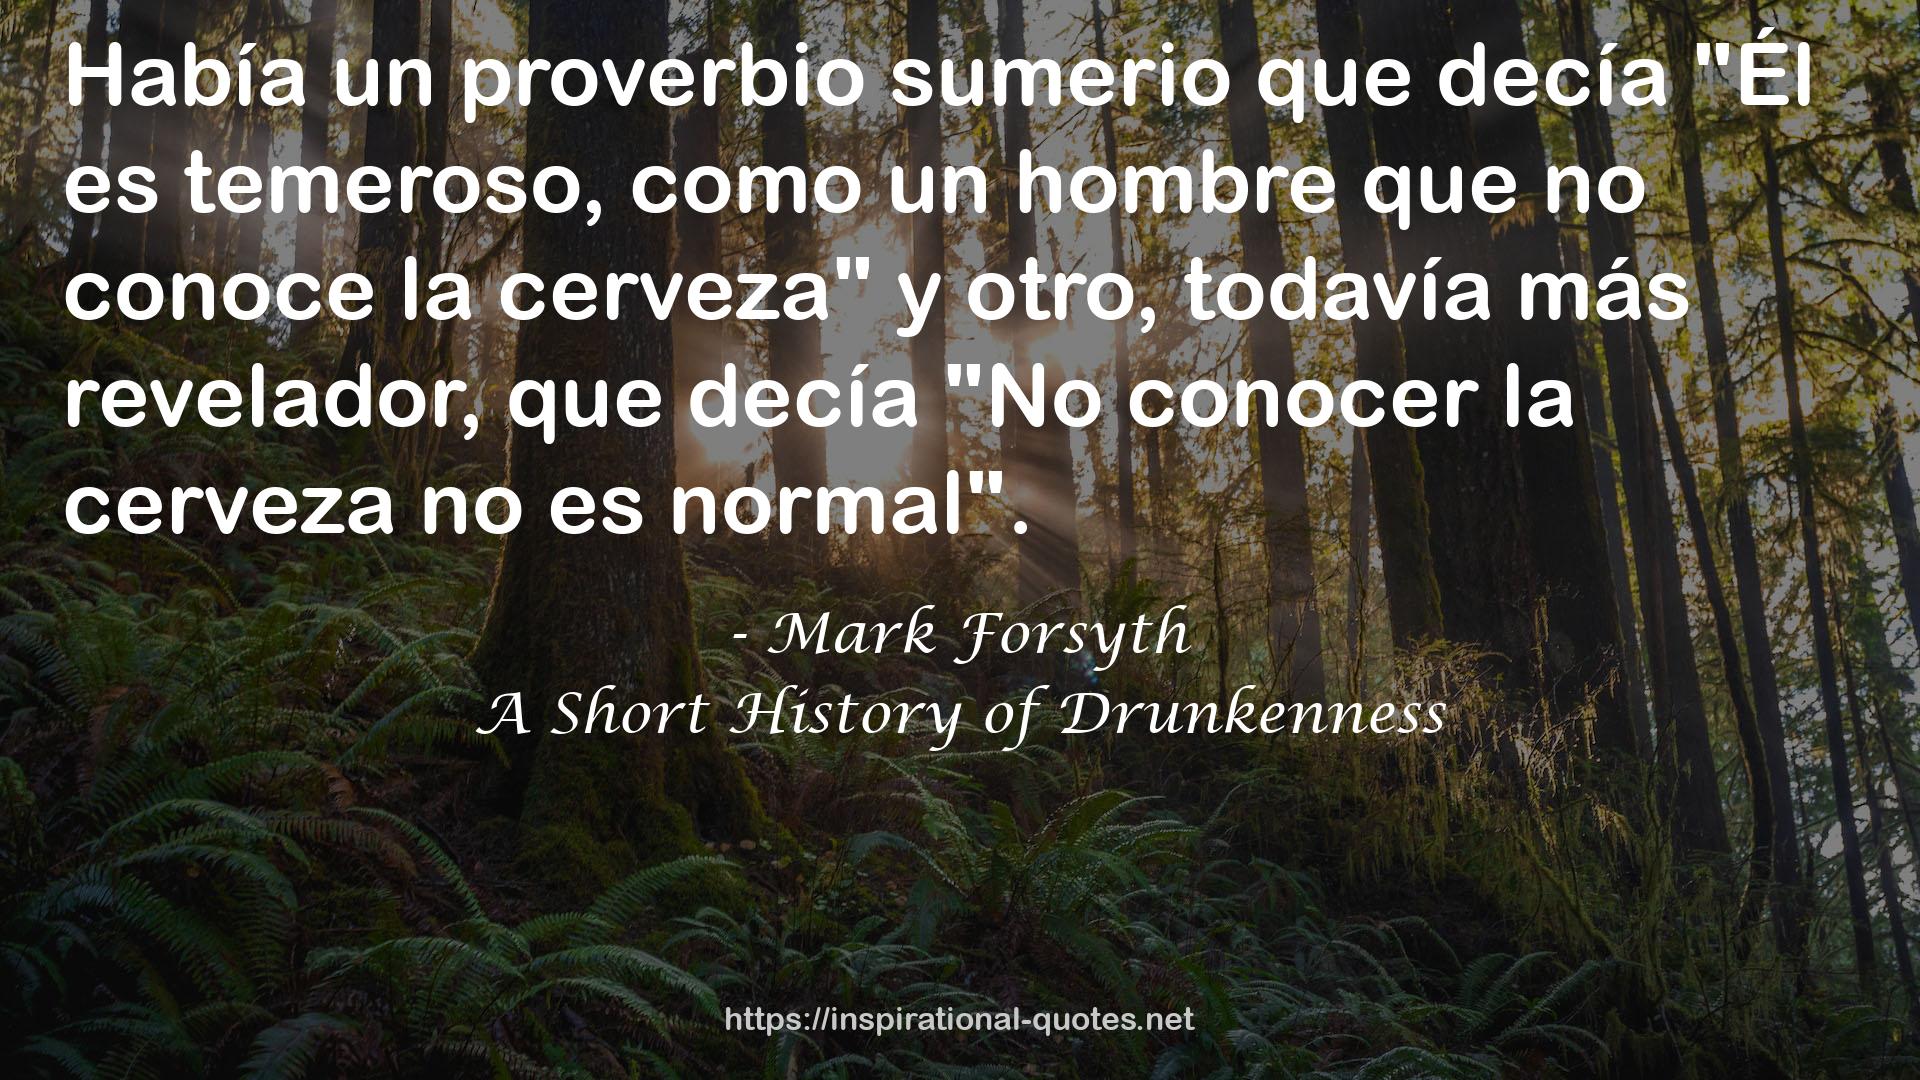 A Short History of Drunkenness QUOTES